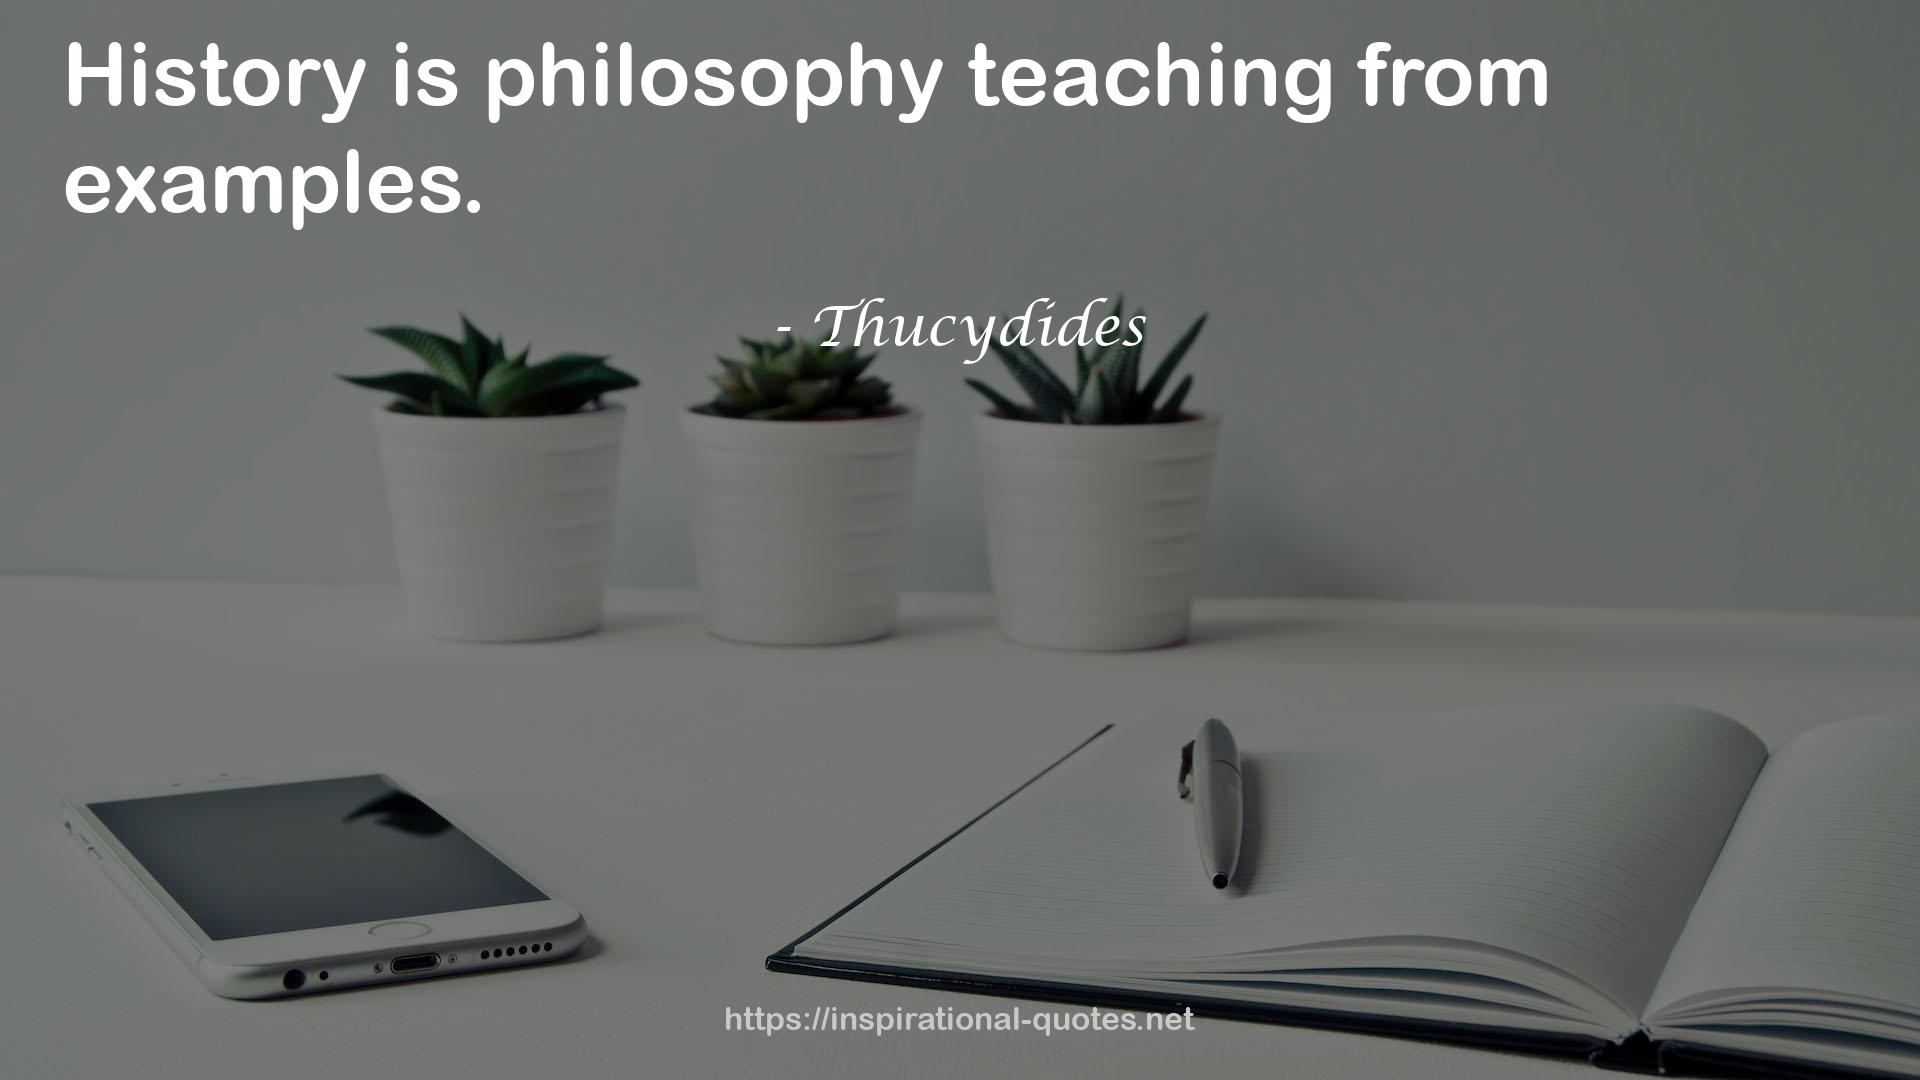 Thucydides QUOTES